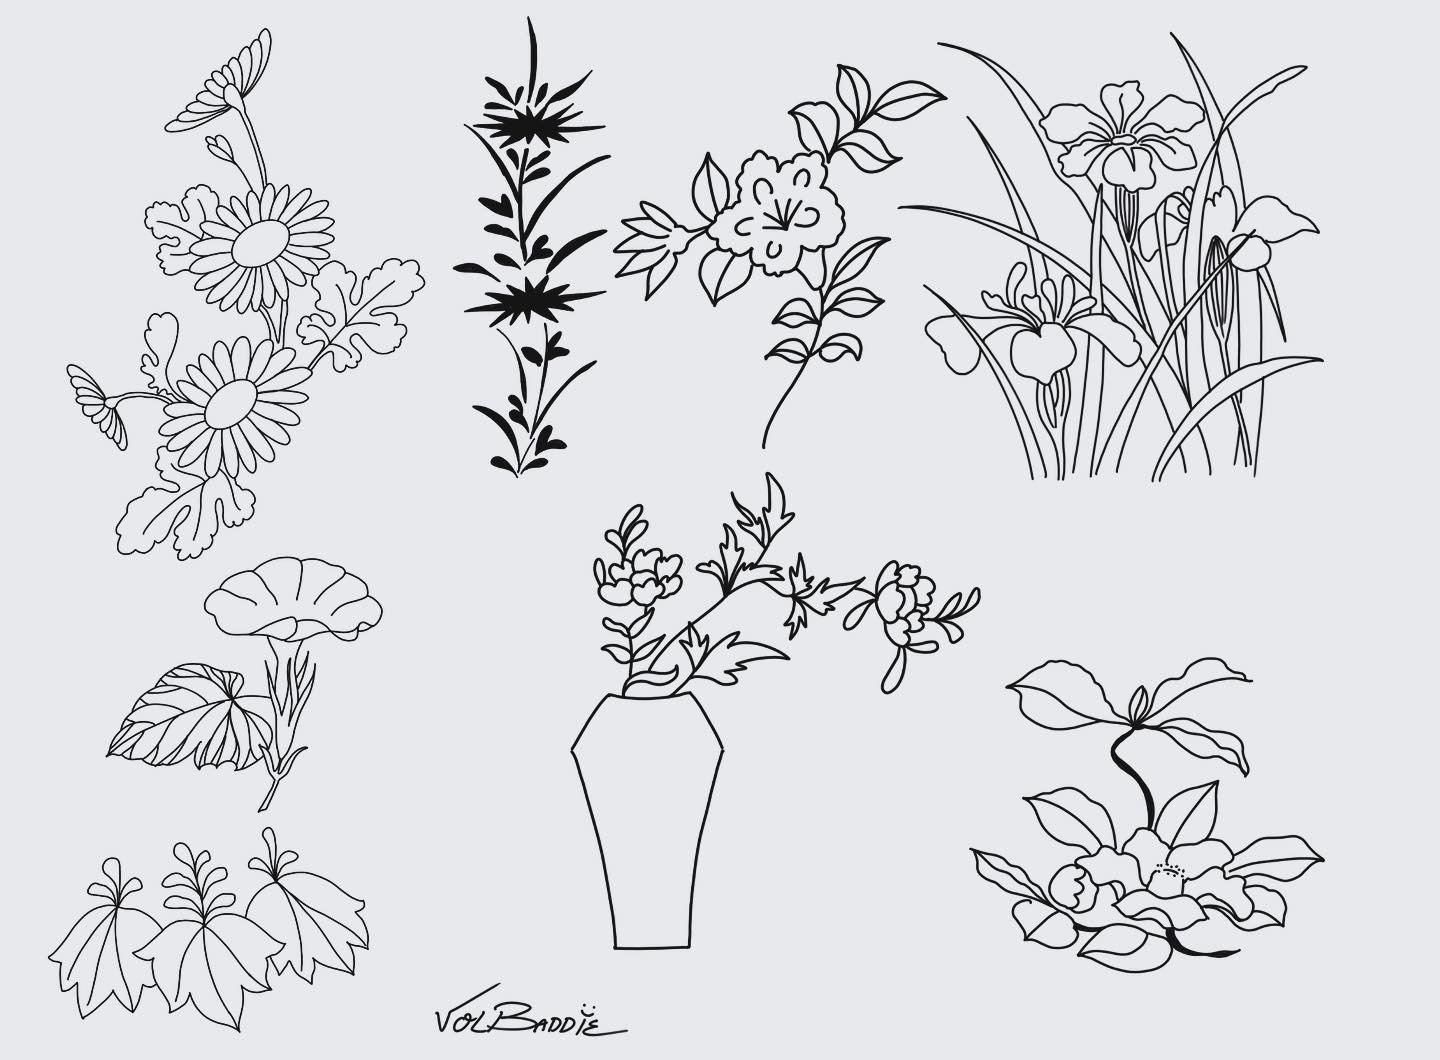 More line drawing designs I would like to tattooing :) @riversidetattootn